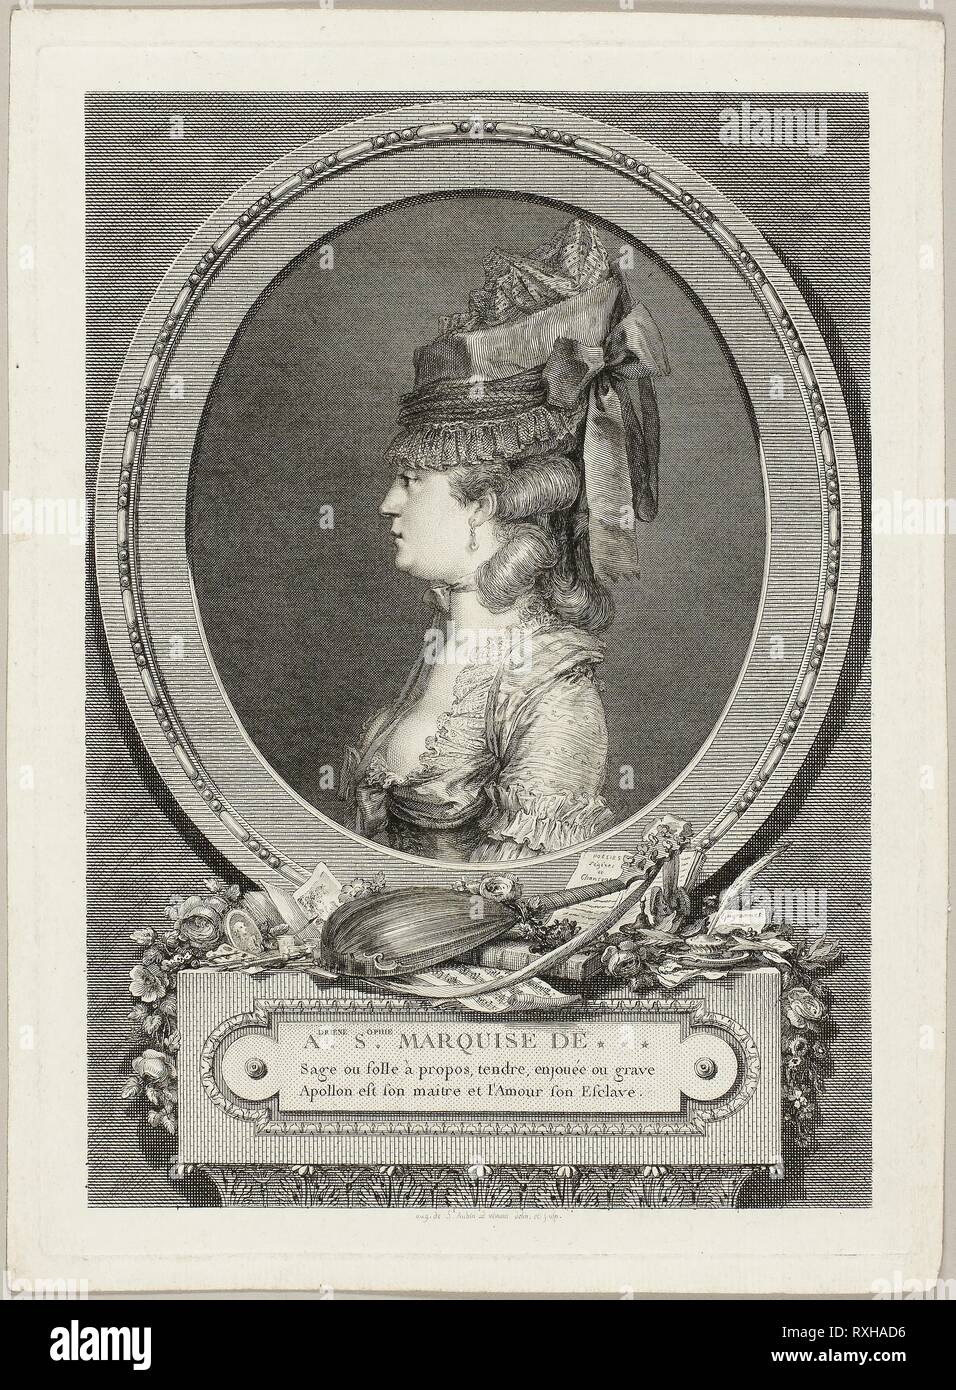 Adrienne-Sophie, Marquise of ***. Augustin de Saint-Aubin; French, 1736-1807. Date: 1779. Dimensions: 260 × 183 mm (image); 284 × 205 mm (plate); 300 × 218 mm (sheet). Etching and engraving in black on ivory laid paper. Origin: France. Museum: The Chicago Art Institute. Stock Photo